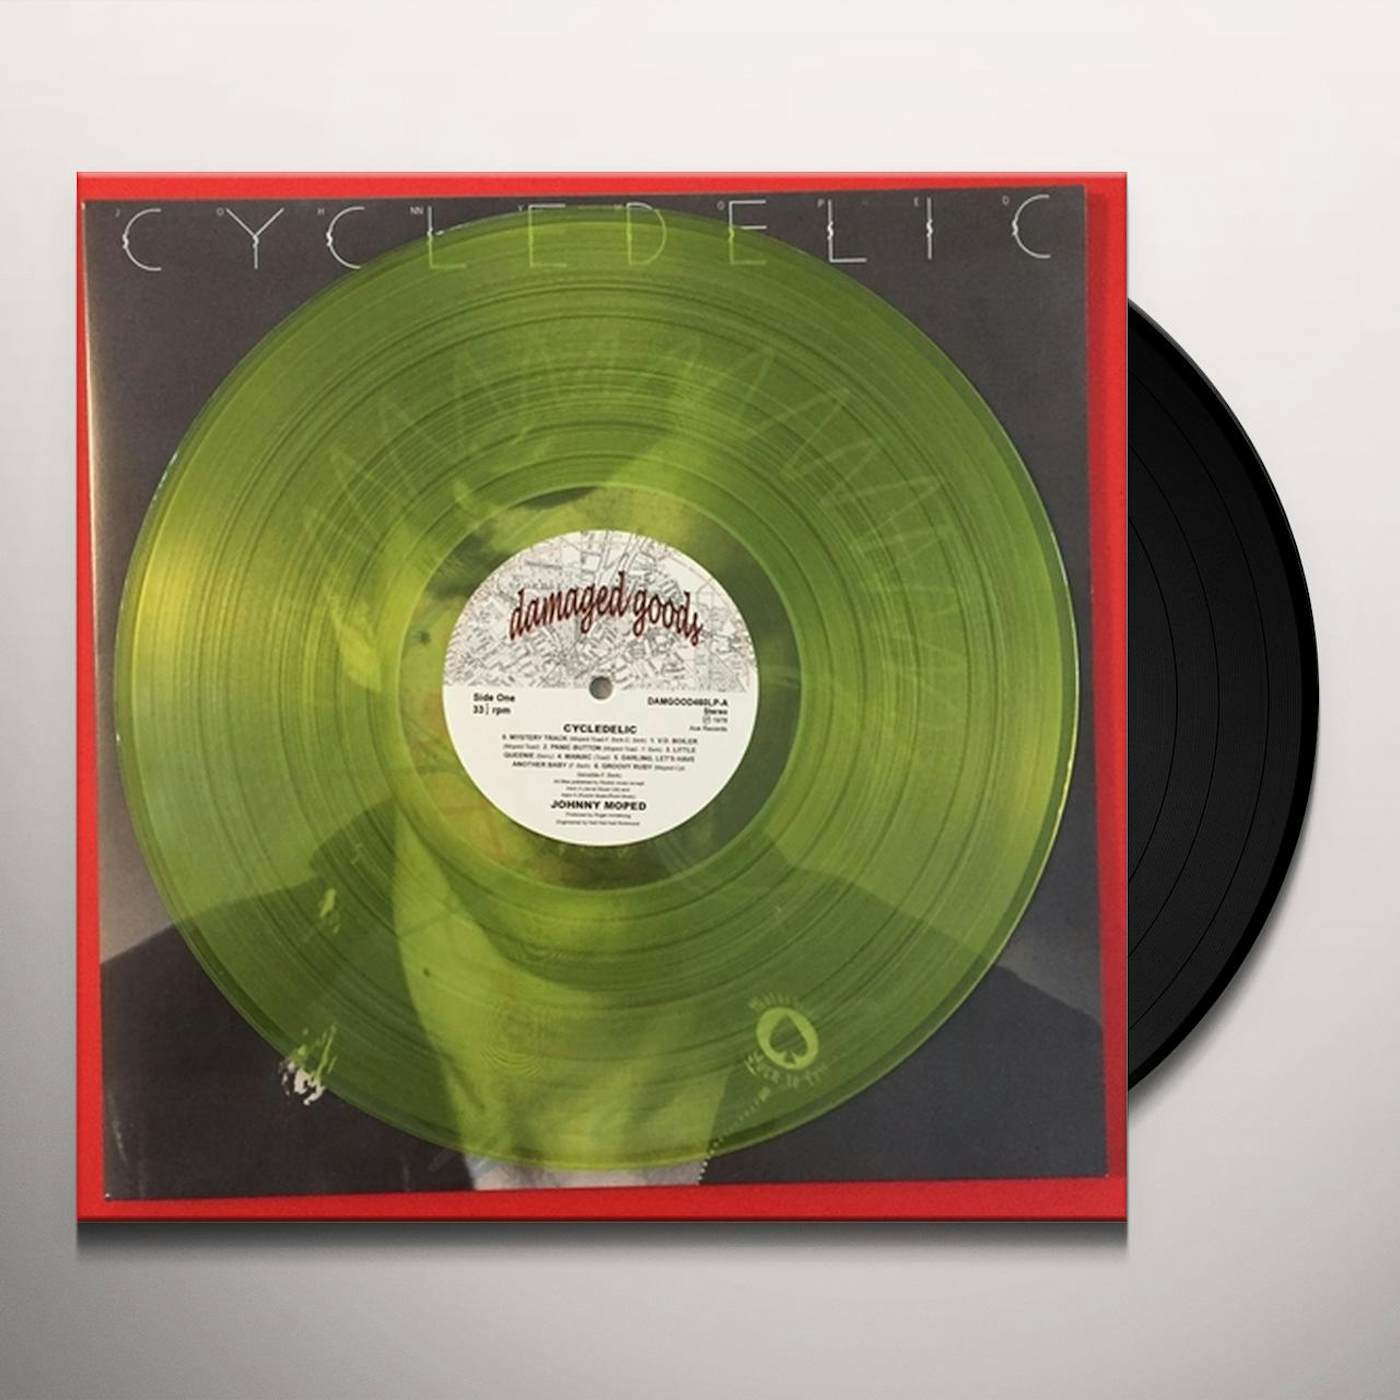 Johnny Moped CYCLEDELIC Vinyl Record - UK Release